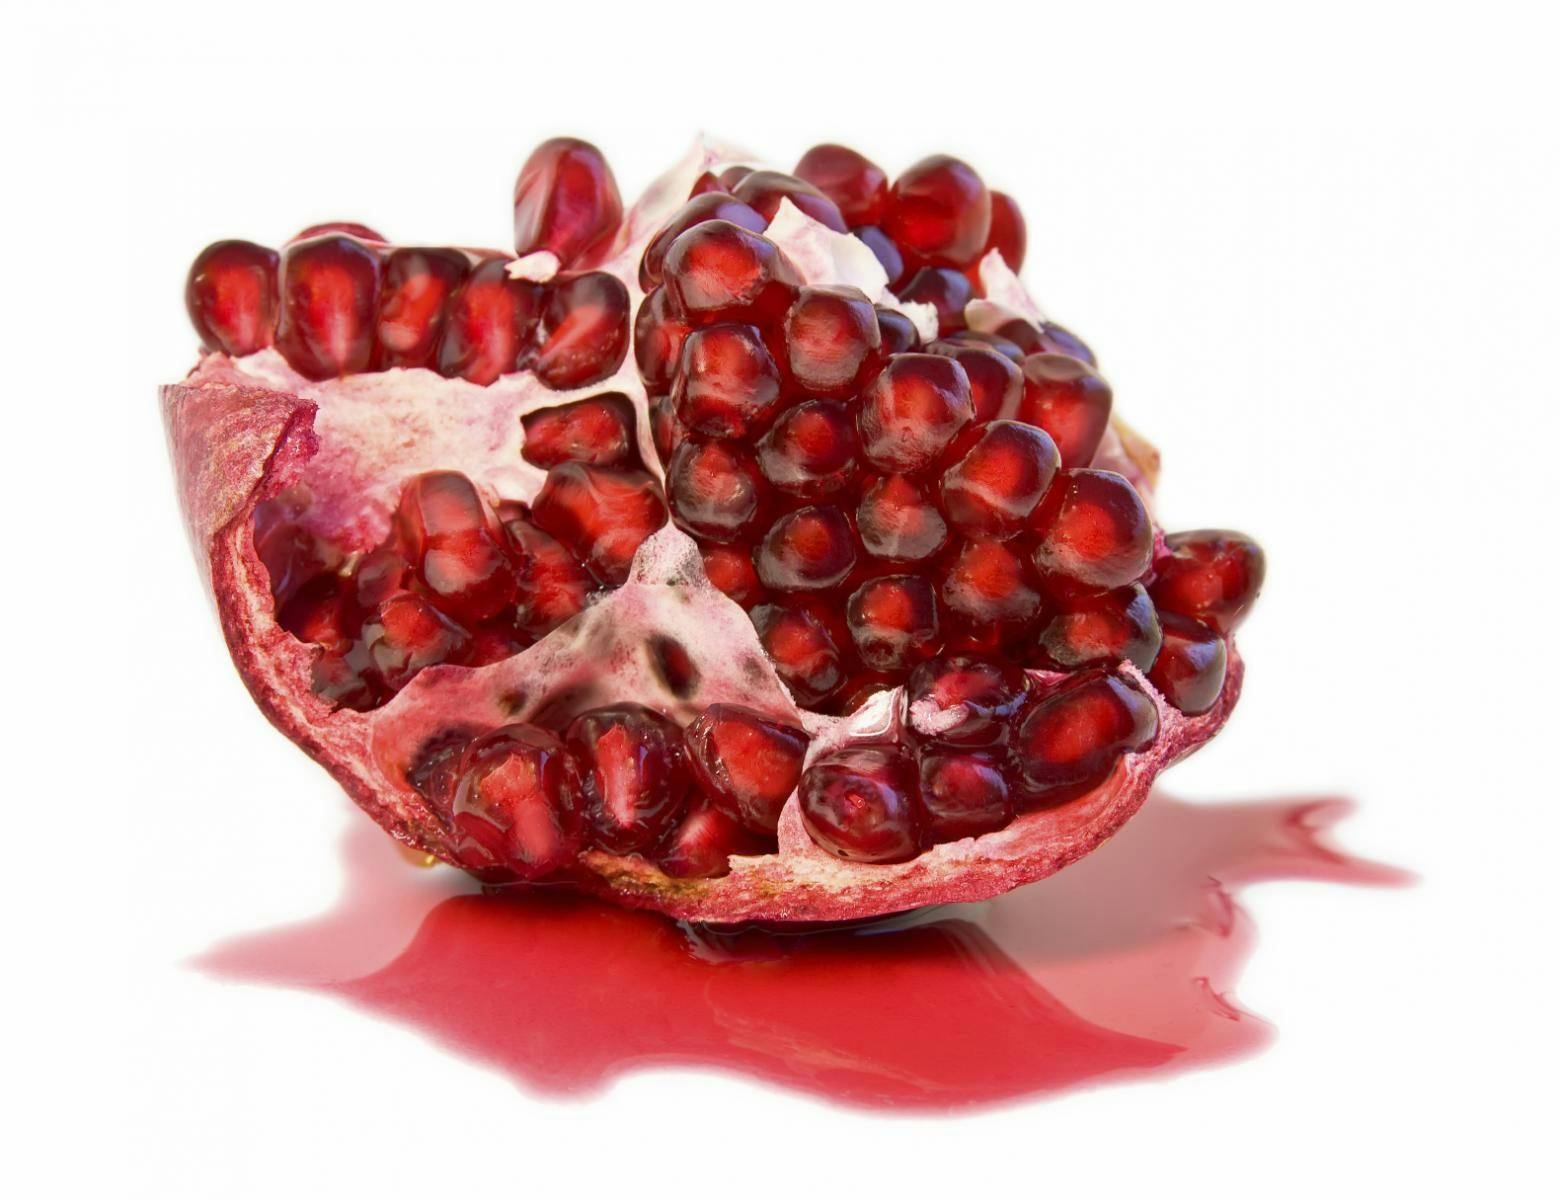 Pomegranate Extract Has Strong Potential in Healthy-Aging Market, Says Euromed 